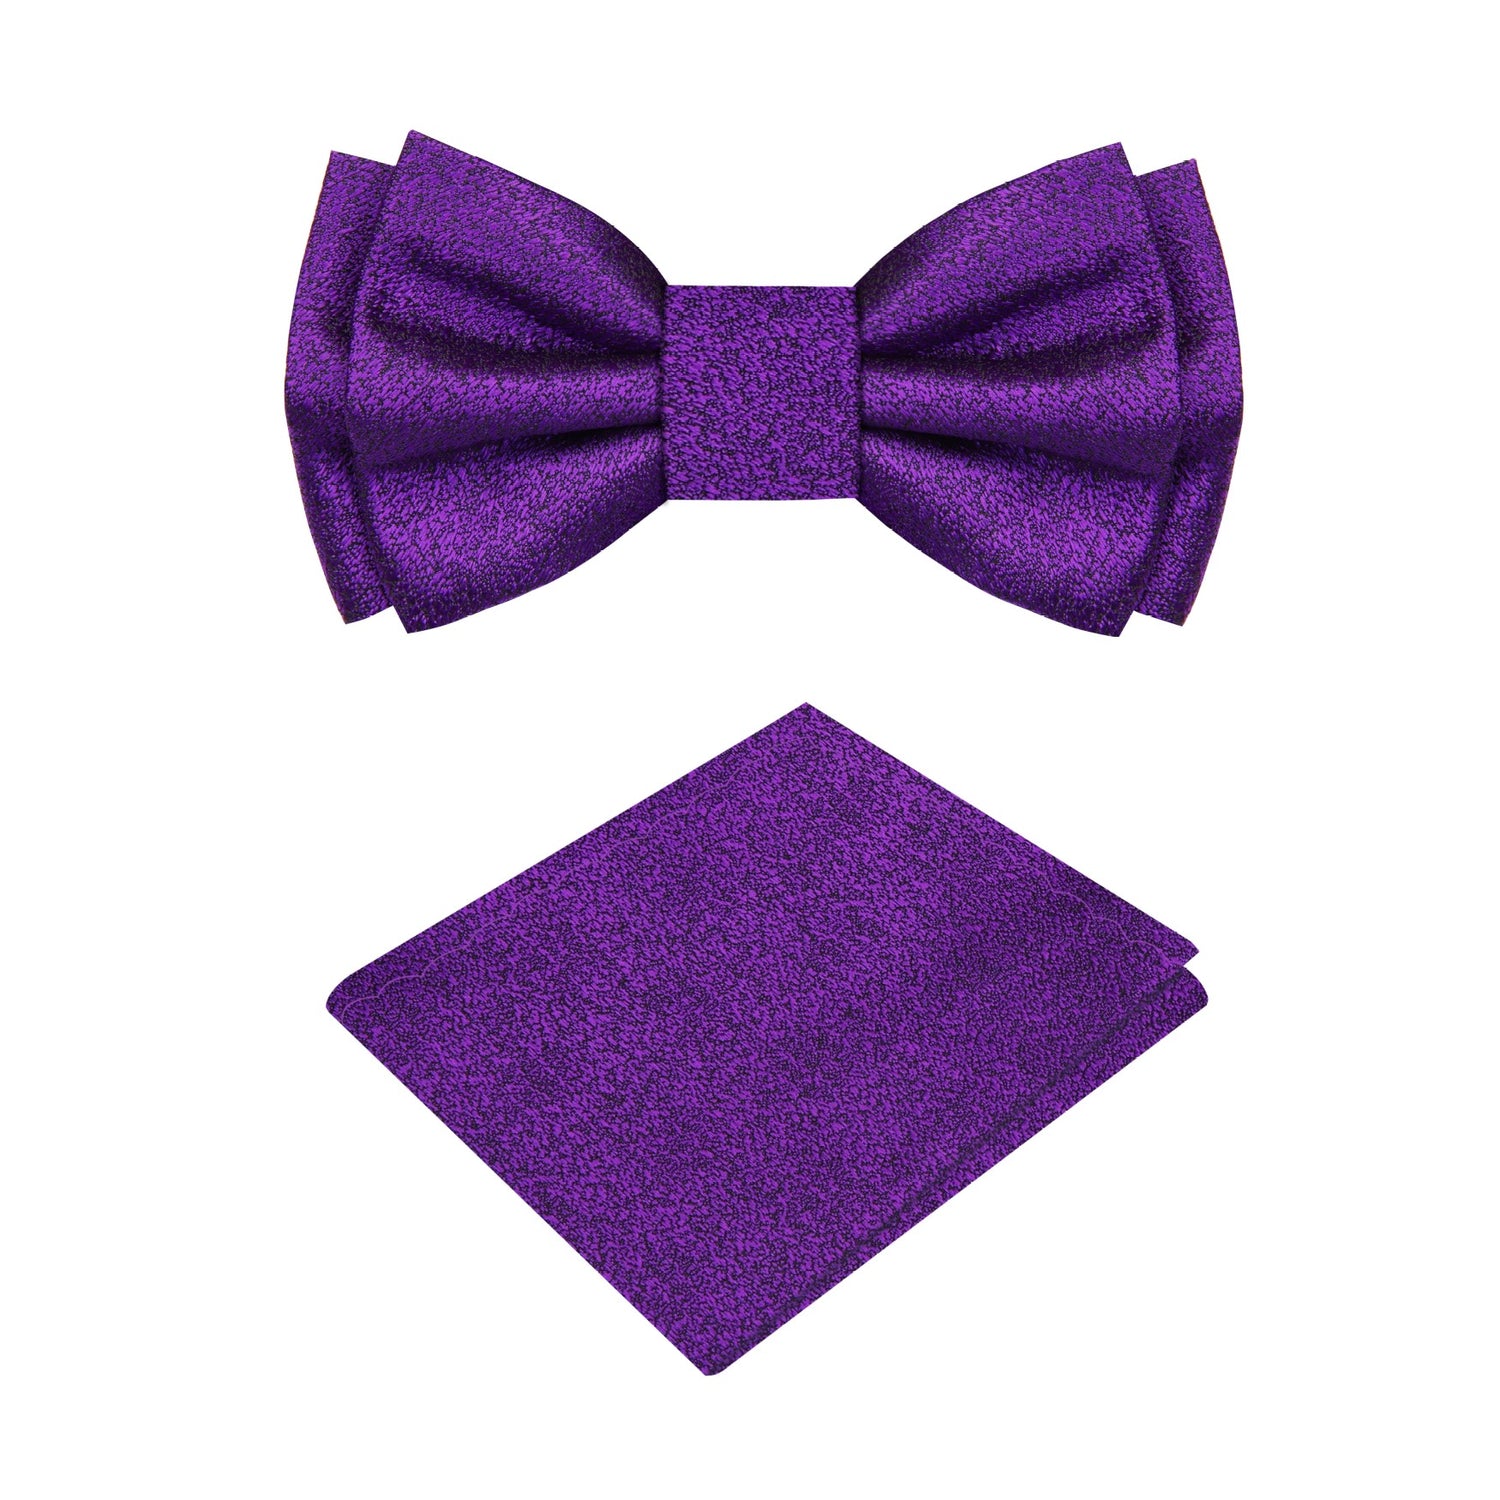 Solid Deep Purple With Texture Bow Tie and Pocket Square